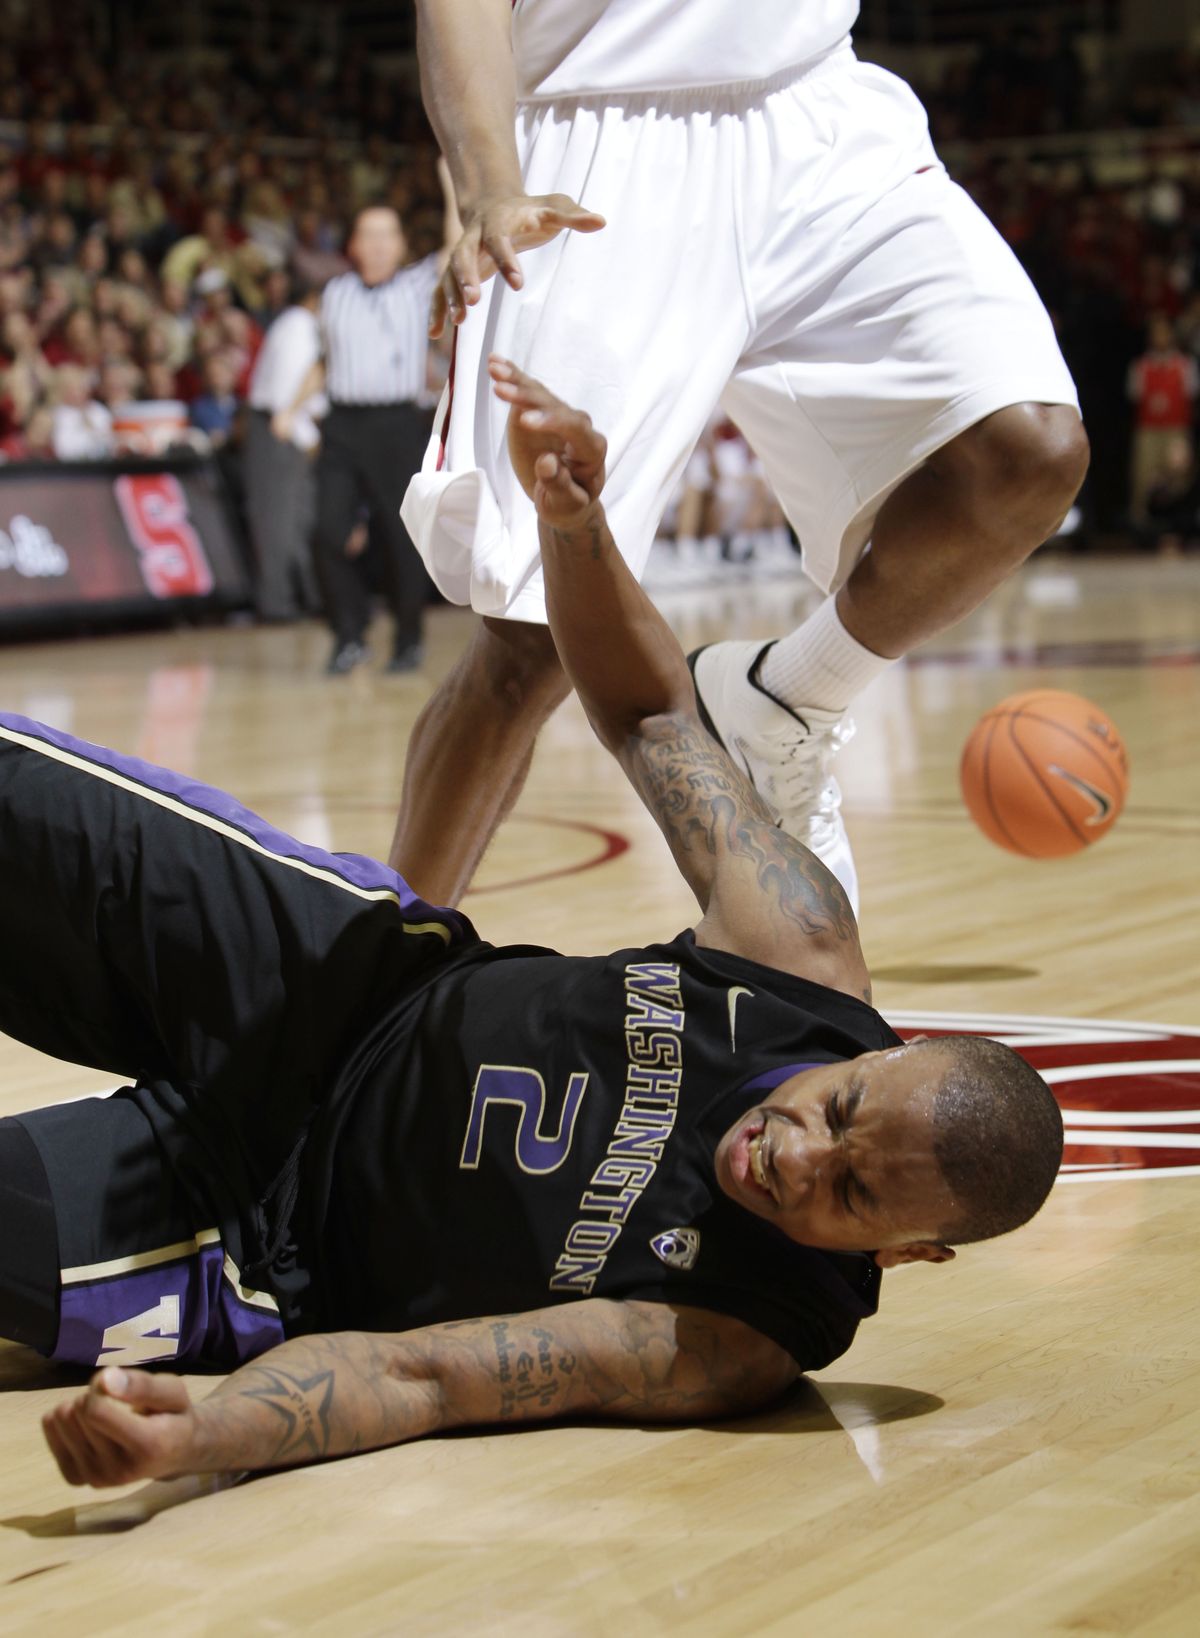 Washington guard Isaiah Thomas (2) is tripped up by Stanford player in the second half of an NCAA college basketball game in Stanford, Calif., Thursday, Jan. 13, 2011. (Paul Sakuma / Associated Press)